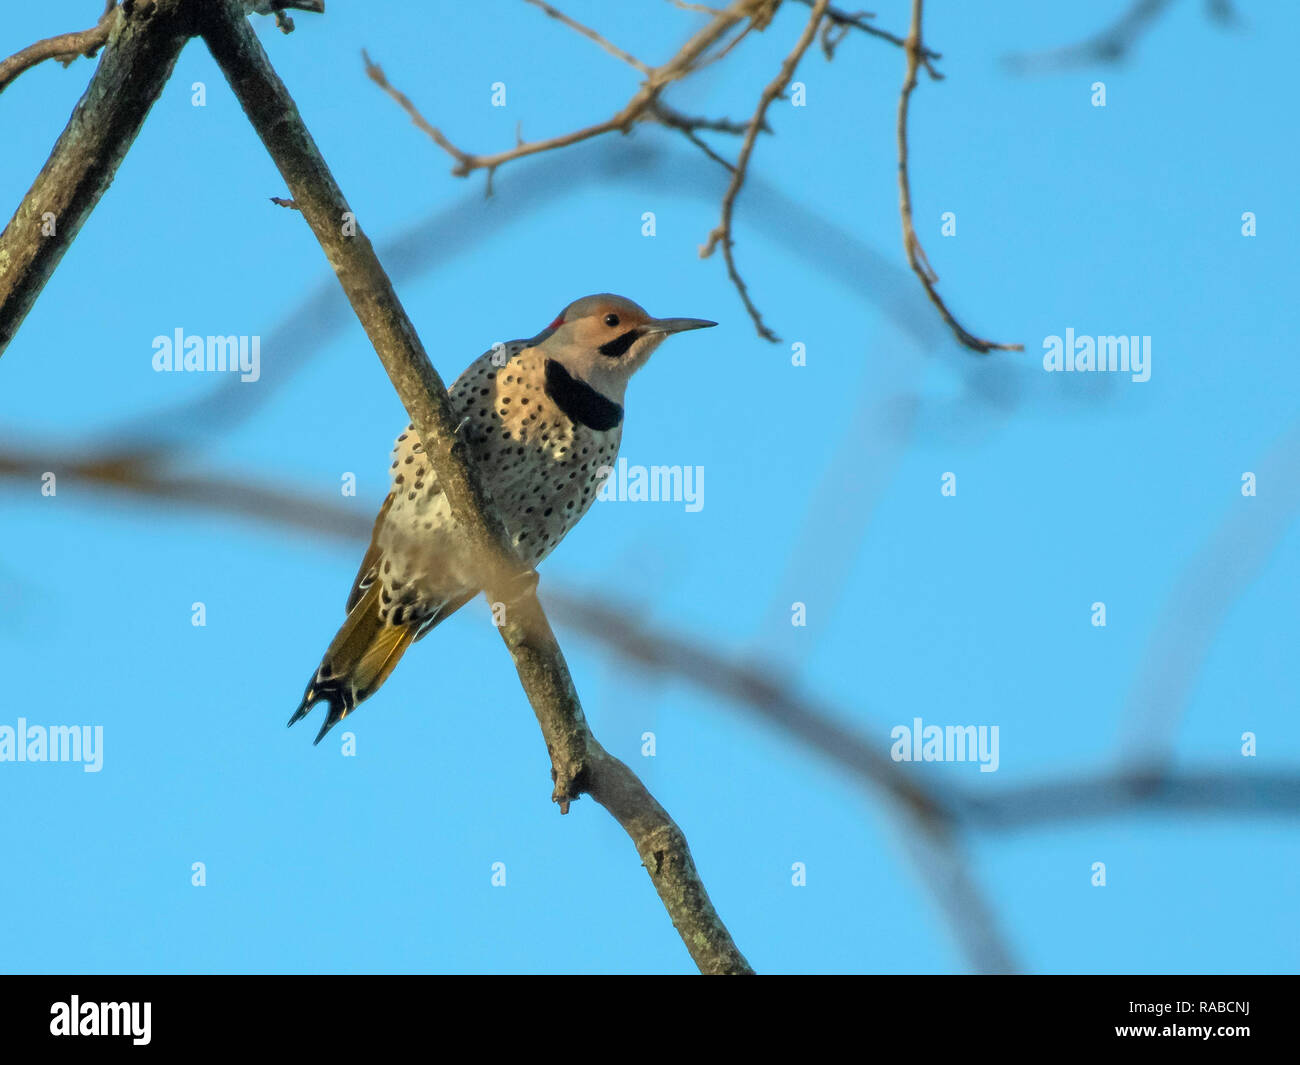 A northern flicker, Colaptes auratus, a type of woodpecker, perches on a branch in the Red River National Wildlife Refuge in northwestern Lousiana. Stock Photo